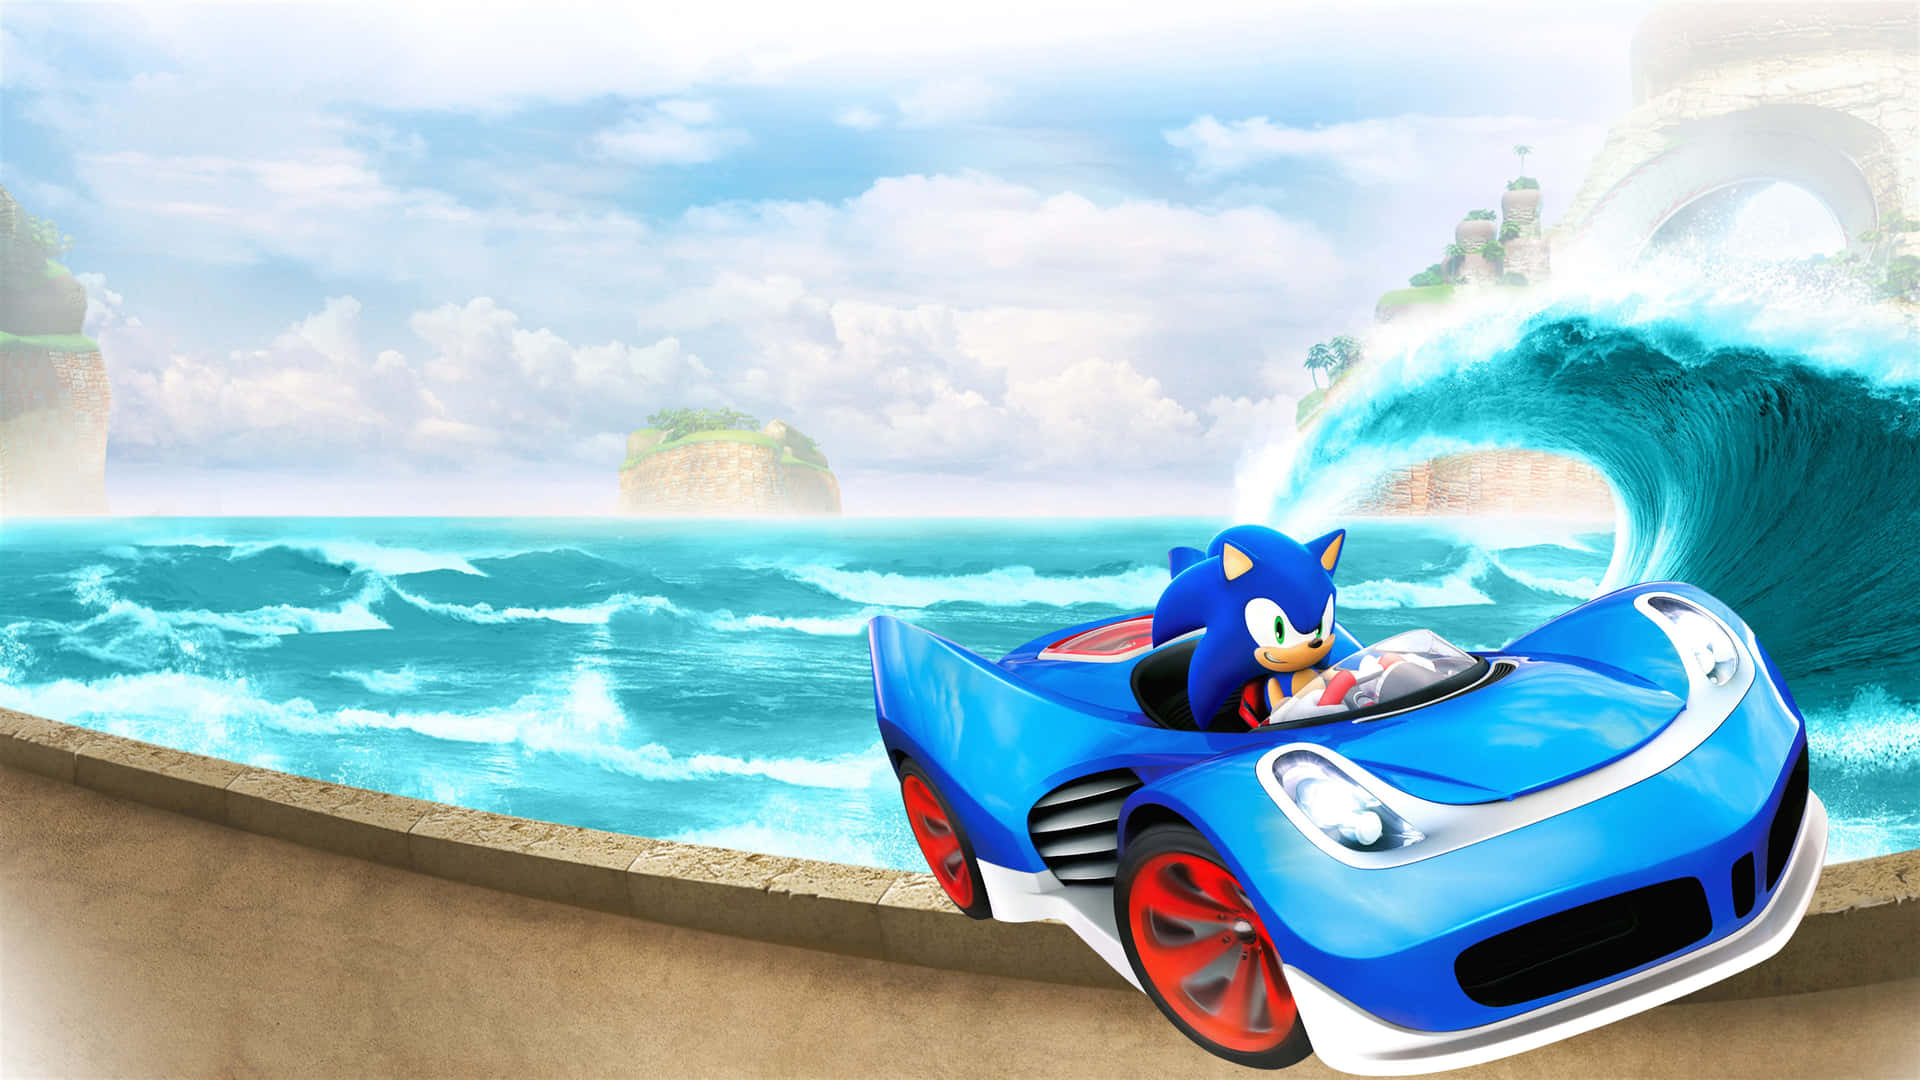 sonic and all stars racing transformed characters